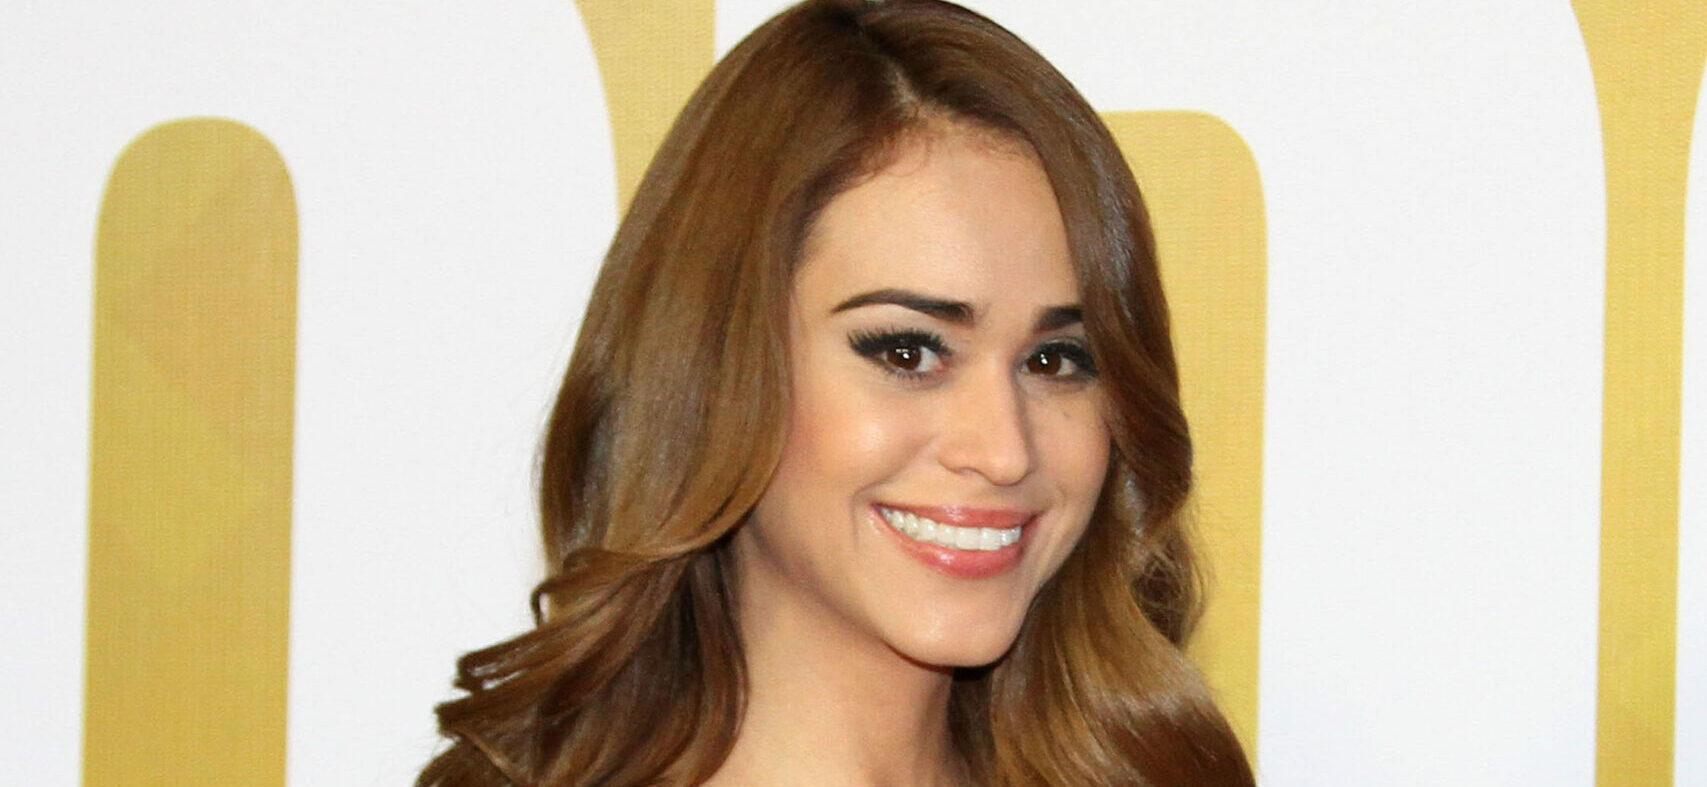 Weather Girl Yanet Garcia Named ‘Hottest Babe On The Planet’ In New Pic